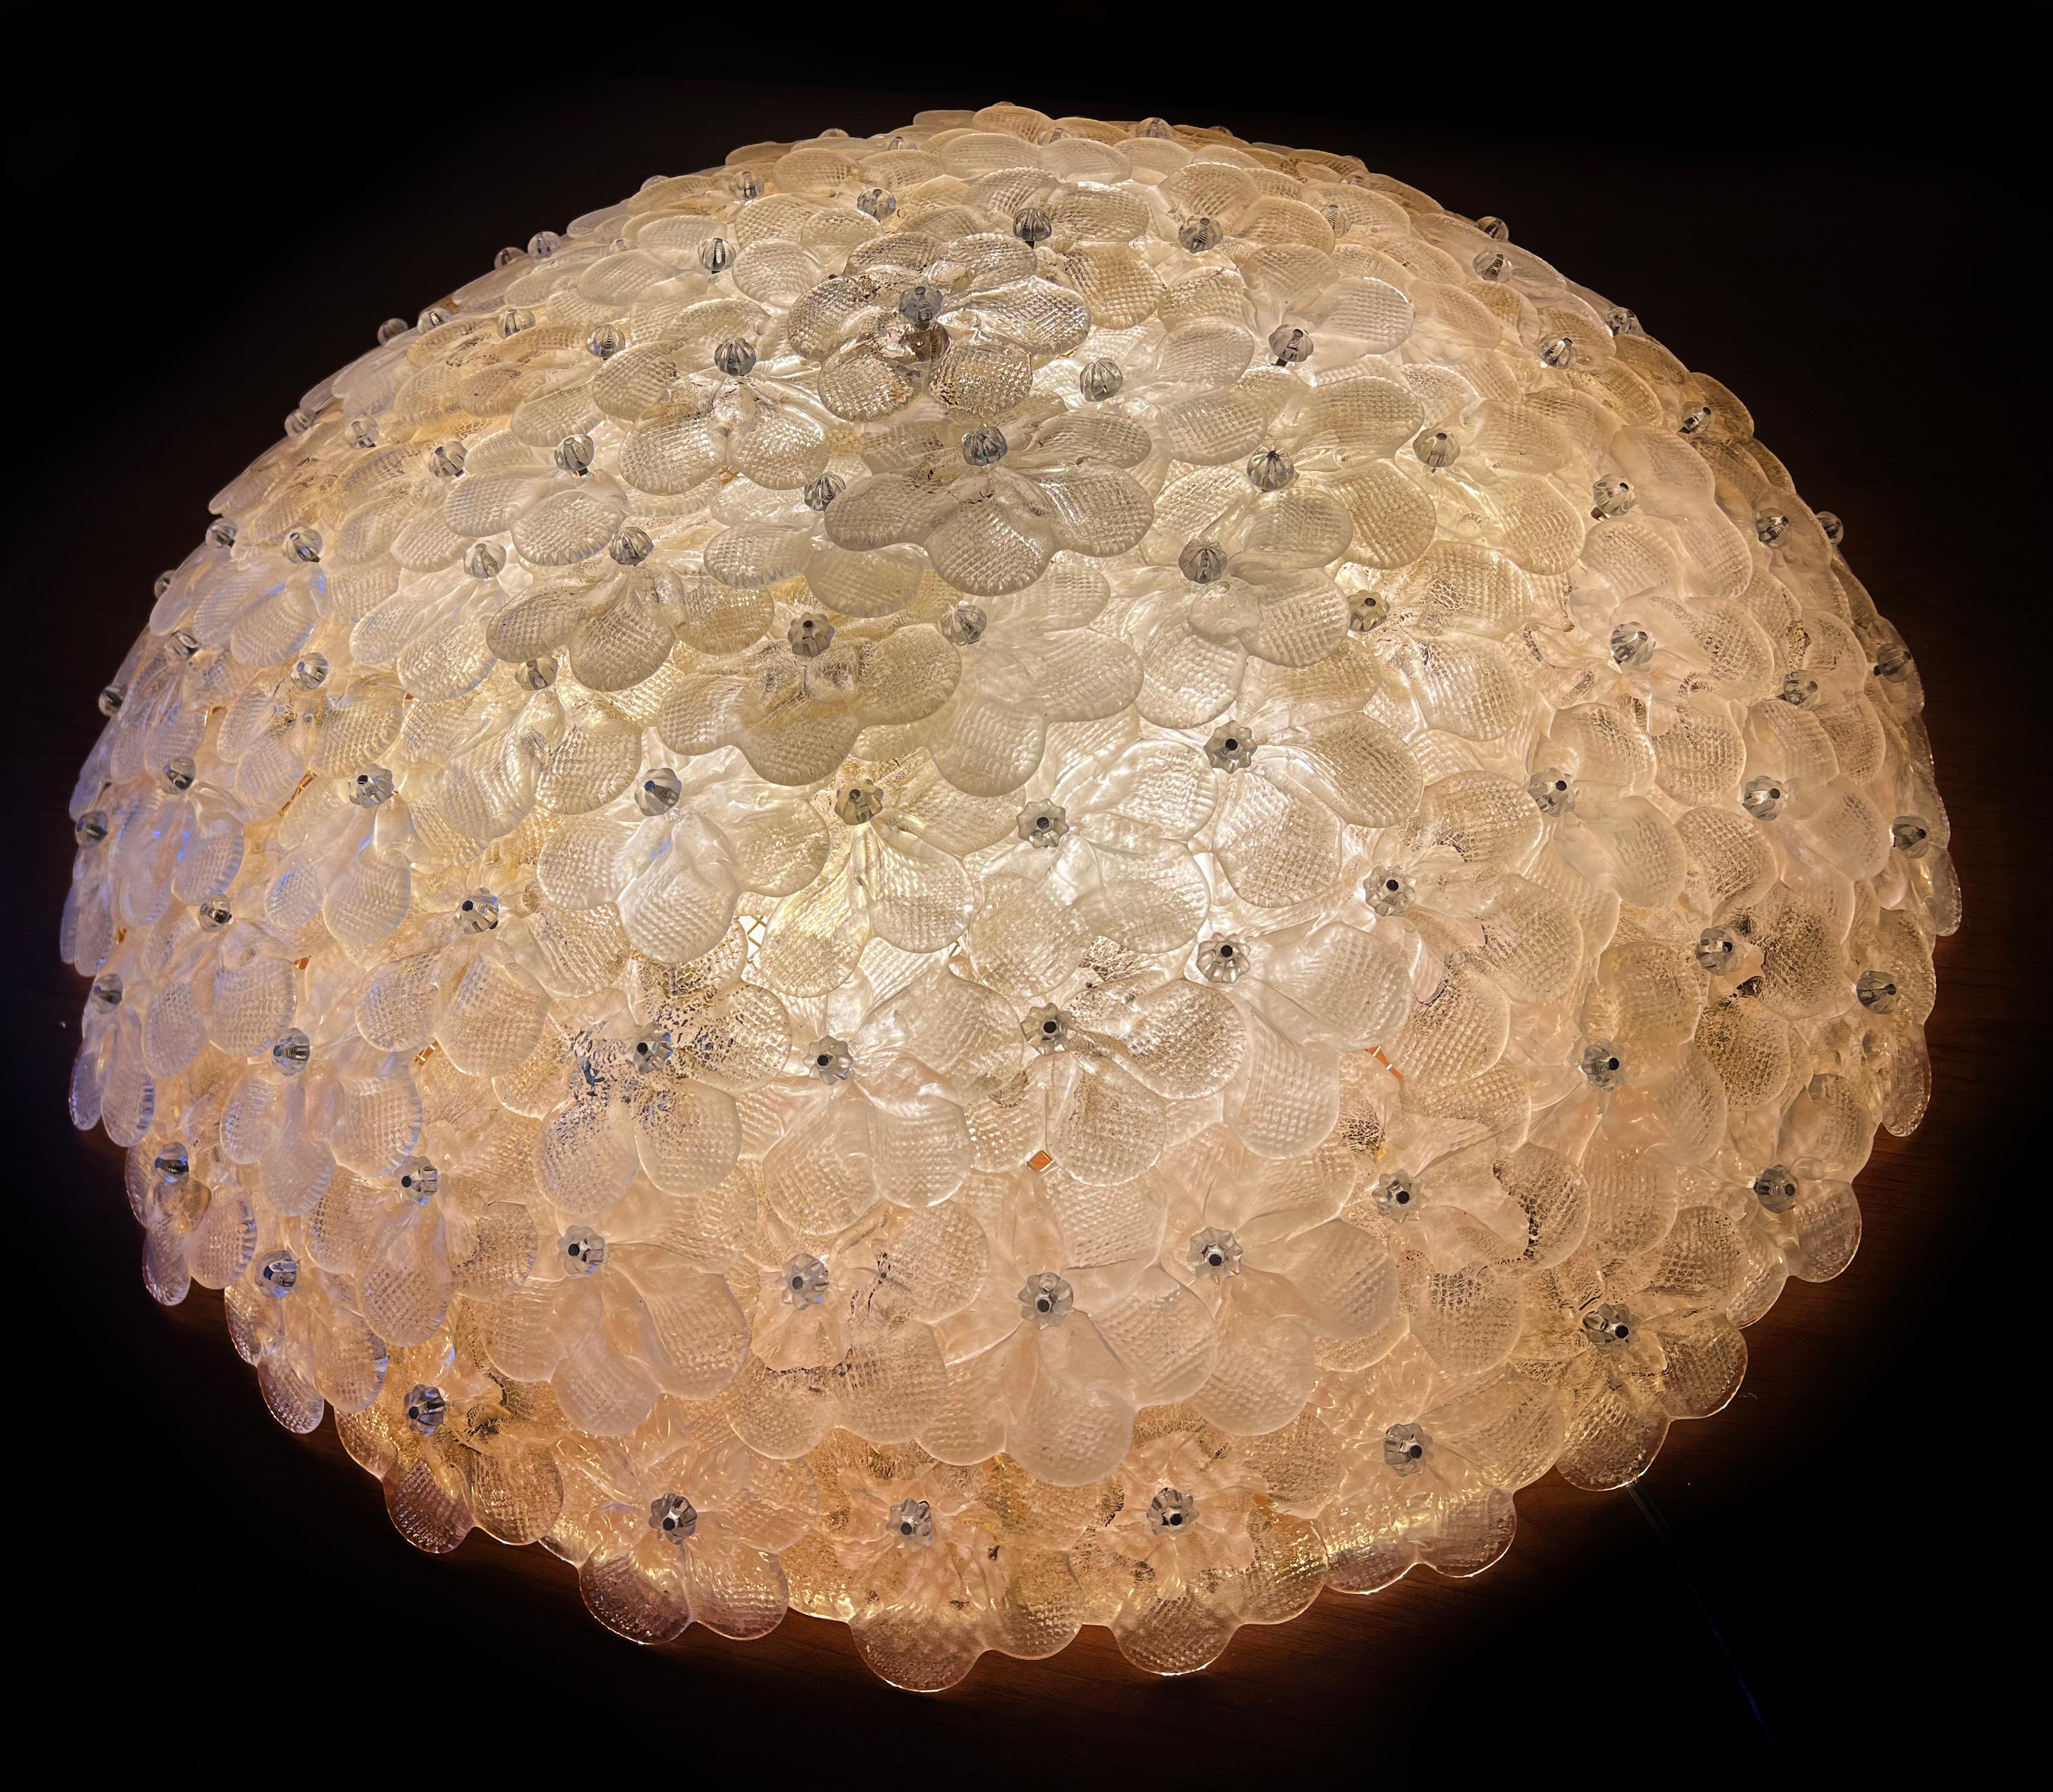 Barovier & Toso Venetian glass flowers basket ceiling.
The ceiling lamp is made of dozens of small roses in precious Murano glass with gold inclusions. 
Measures: Diameter 62 cm
Height 17,5 cm.